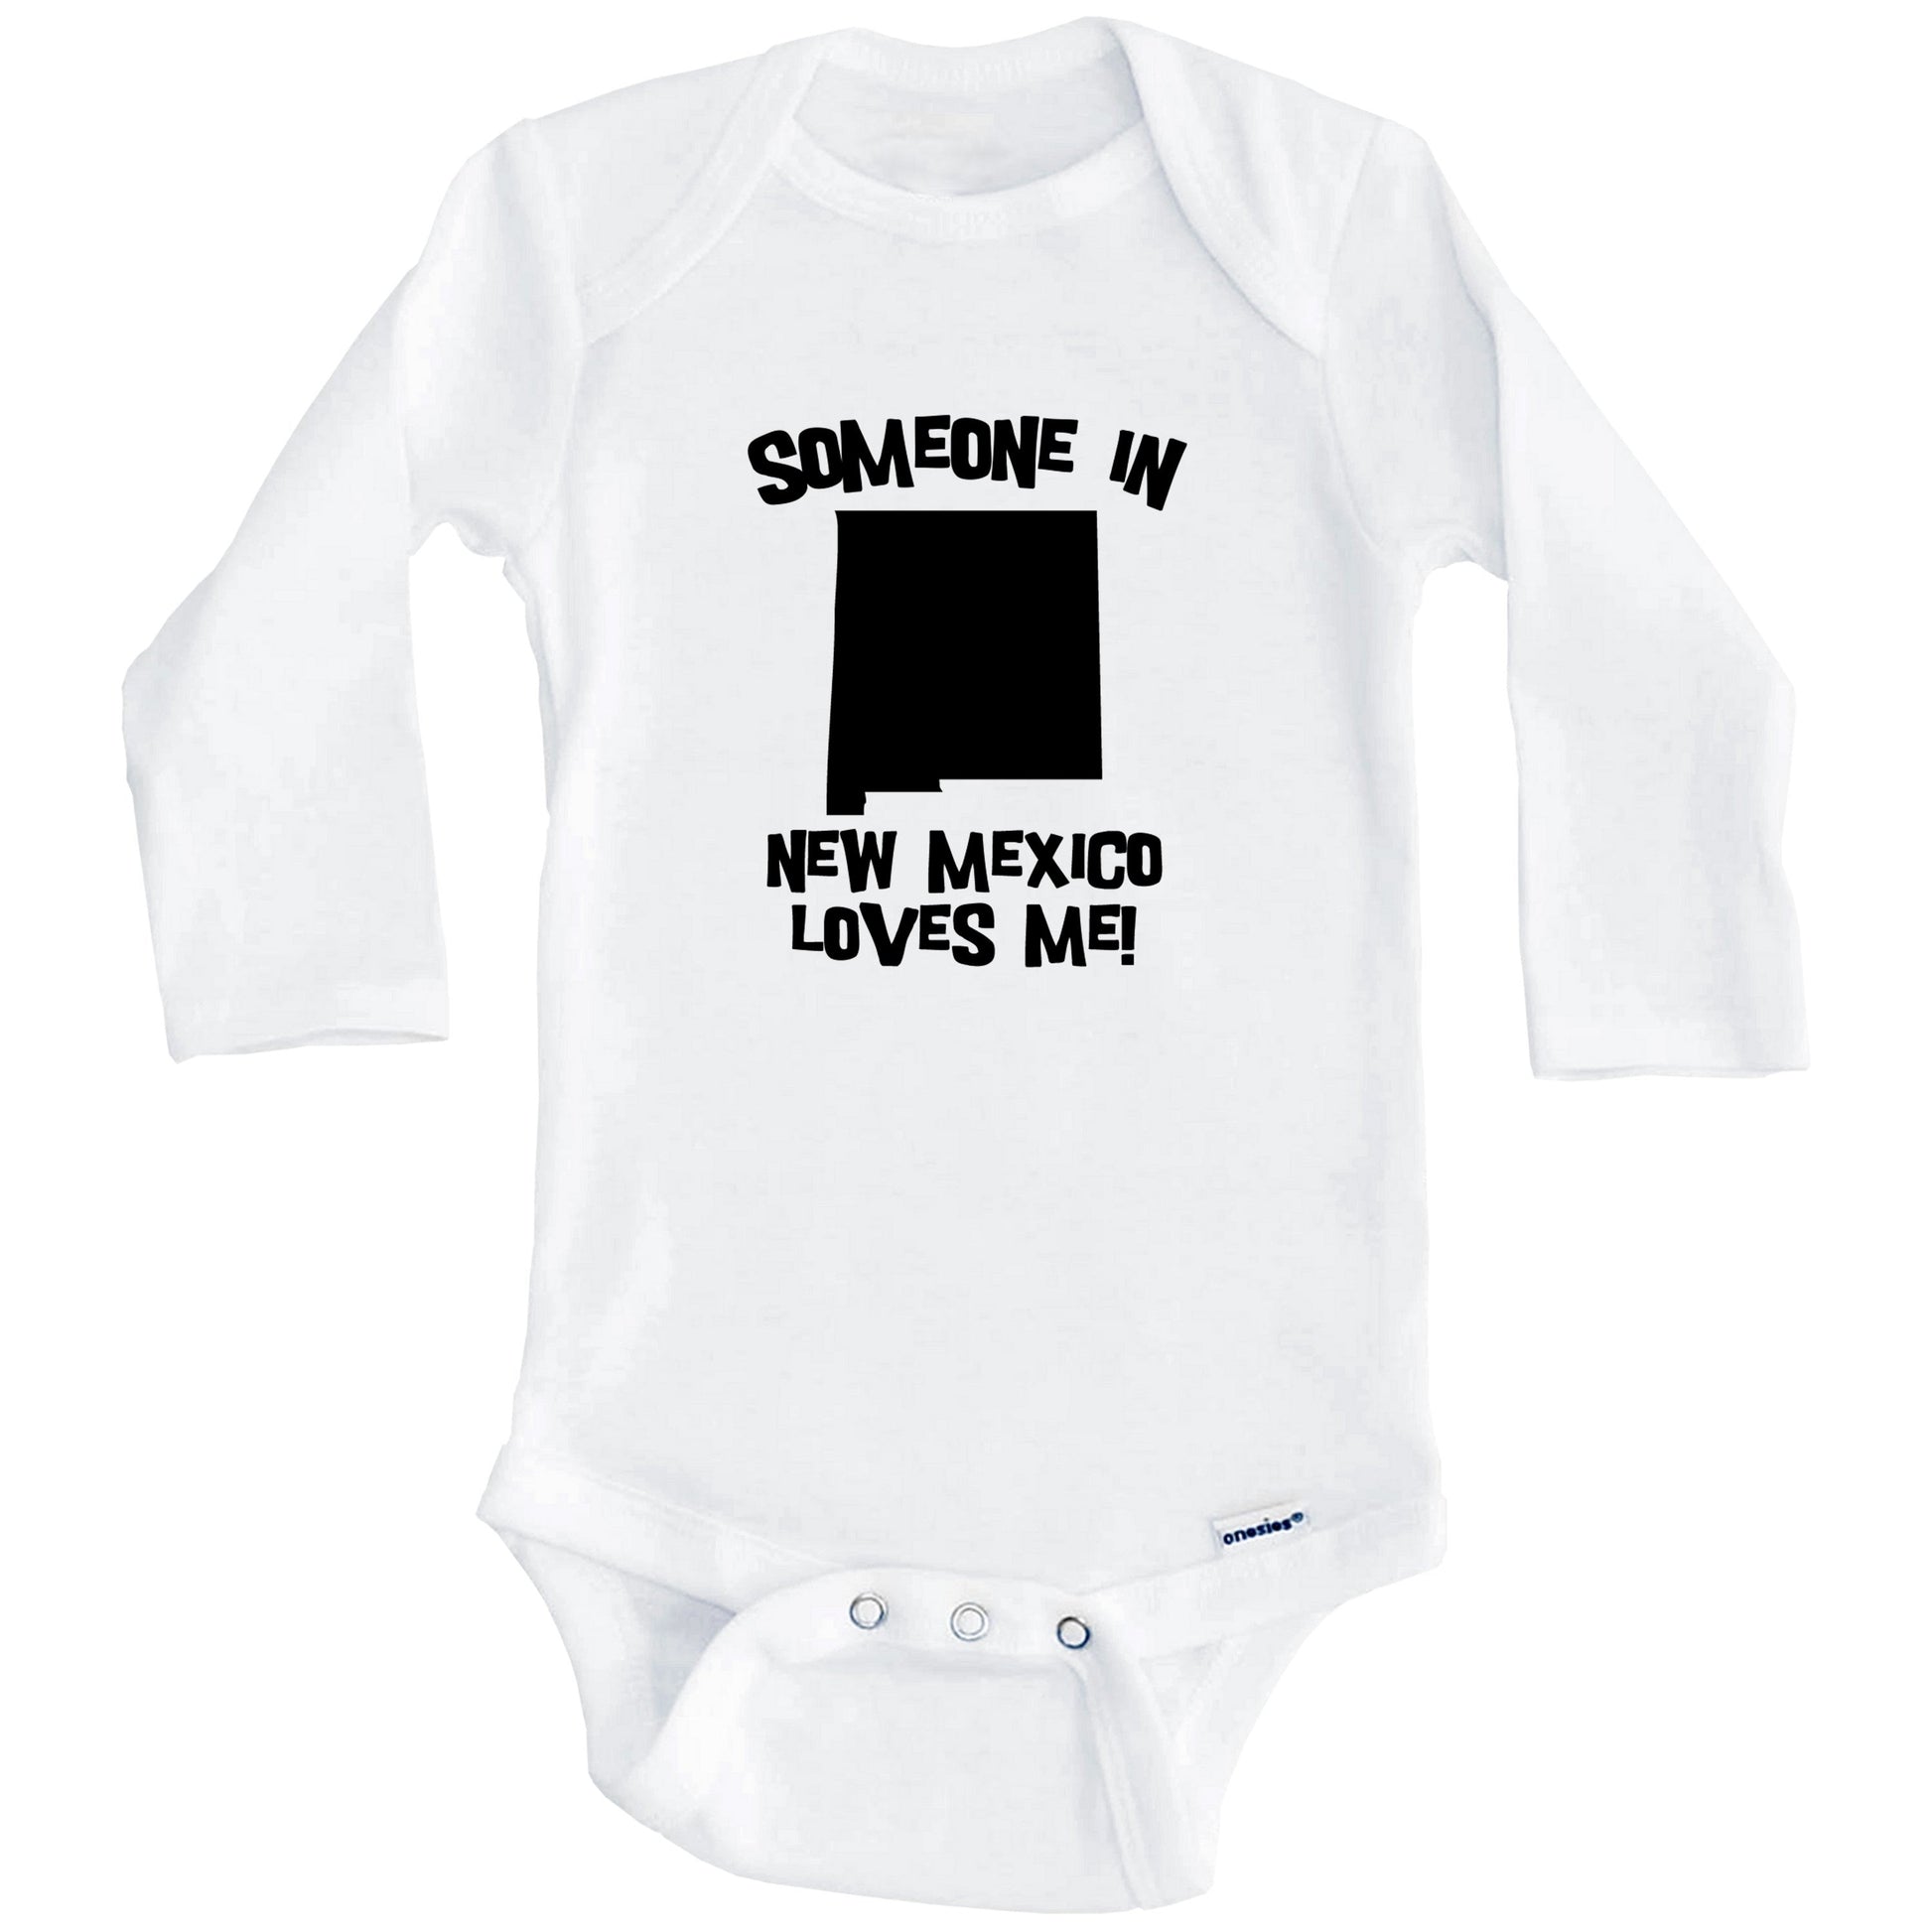 Someone In New Mexico Loves Me State Silhouette Cute Baby Onesie - One Piece Baby Bodysuit (Long Sleeves)